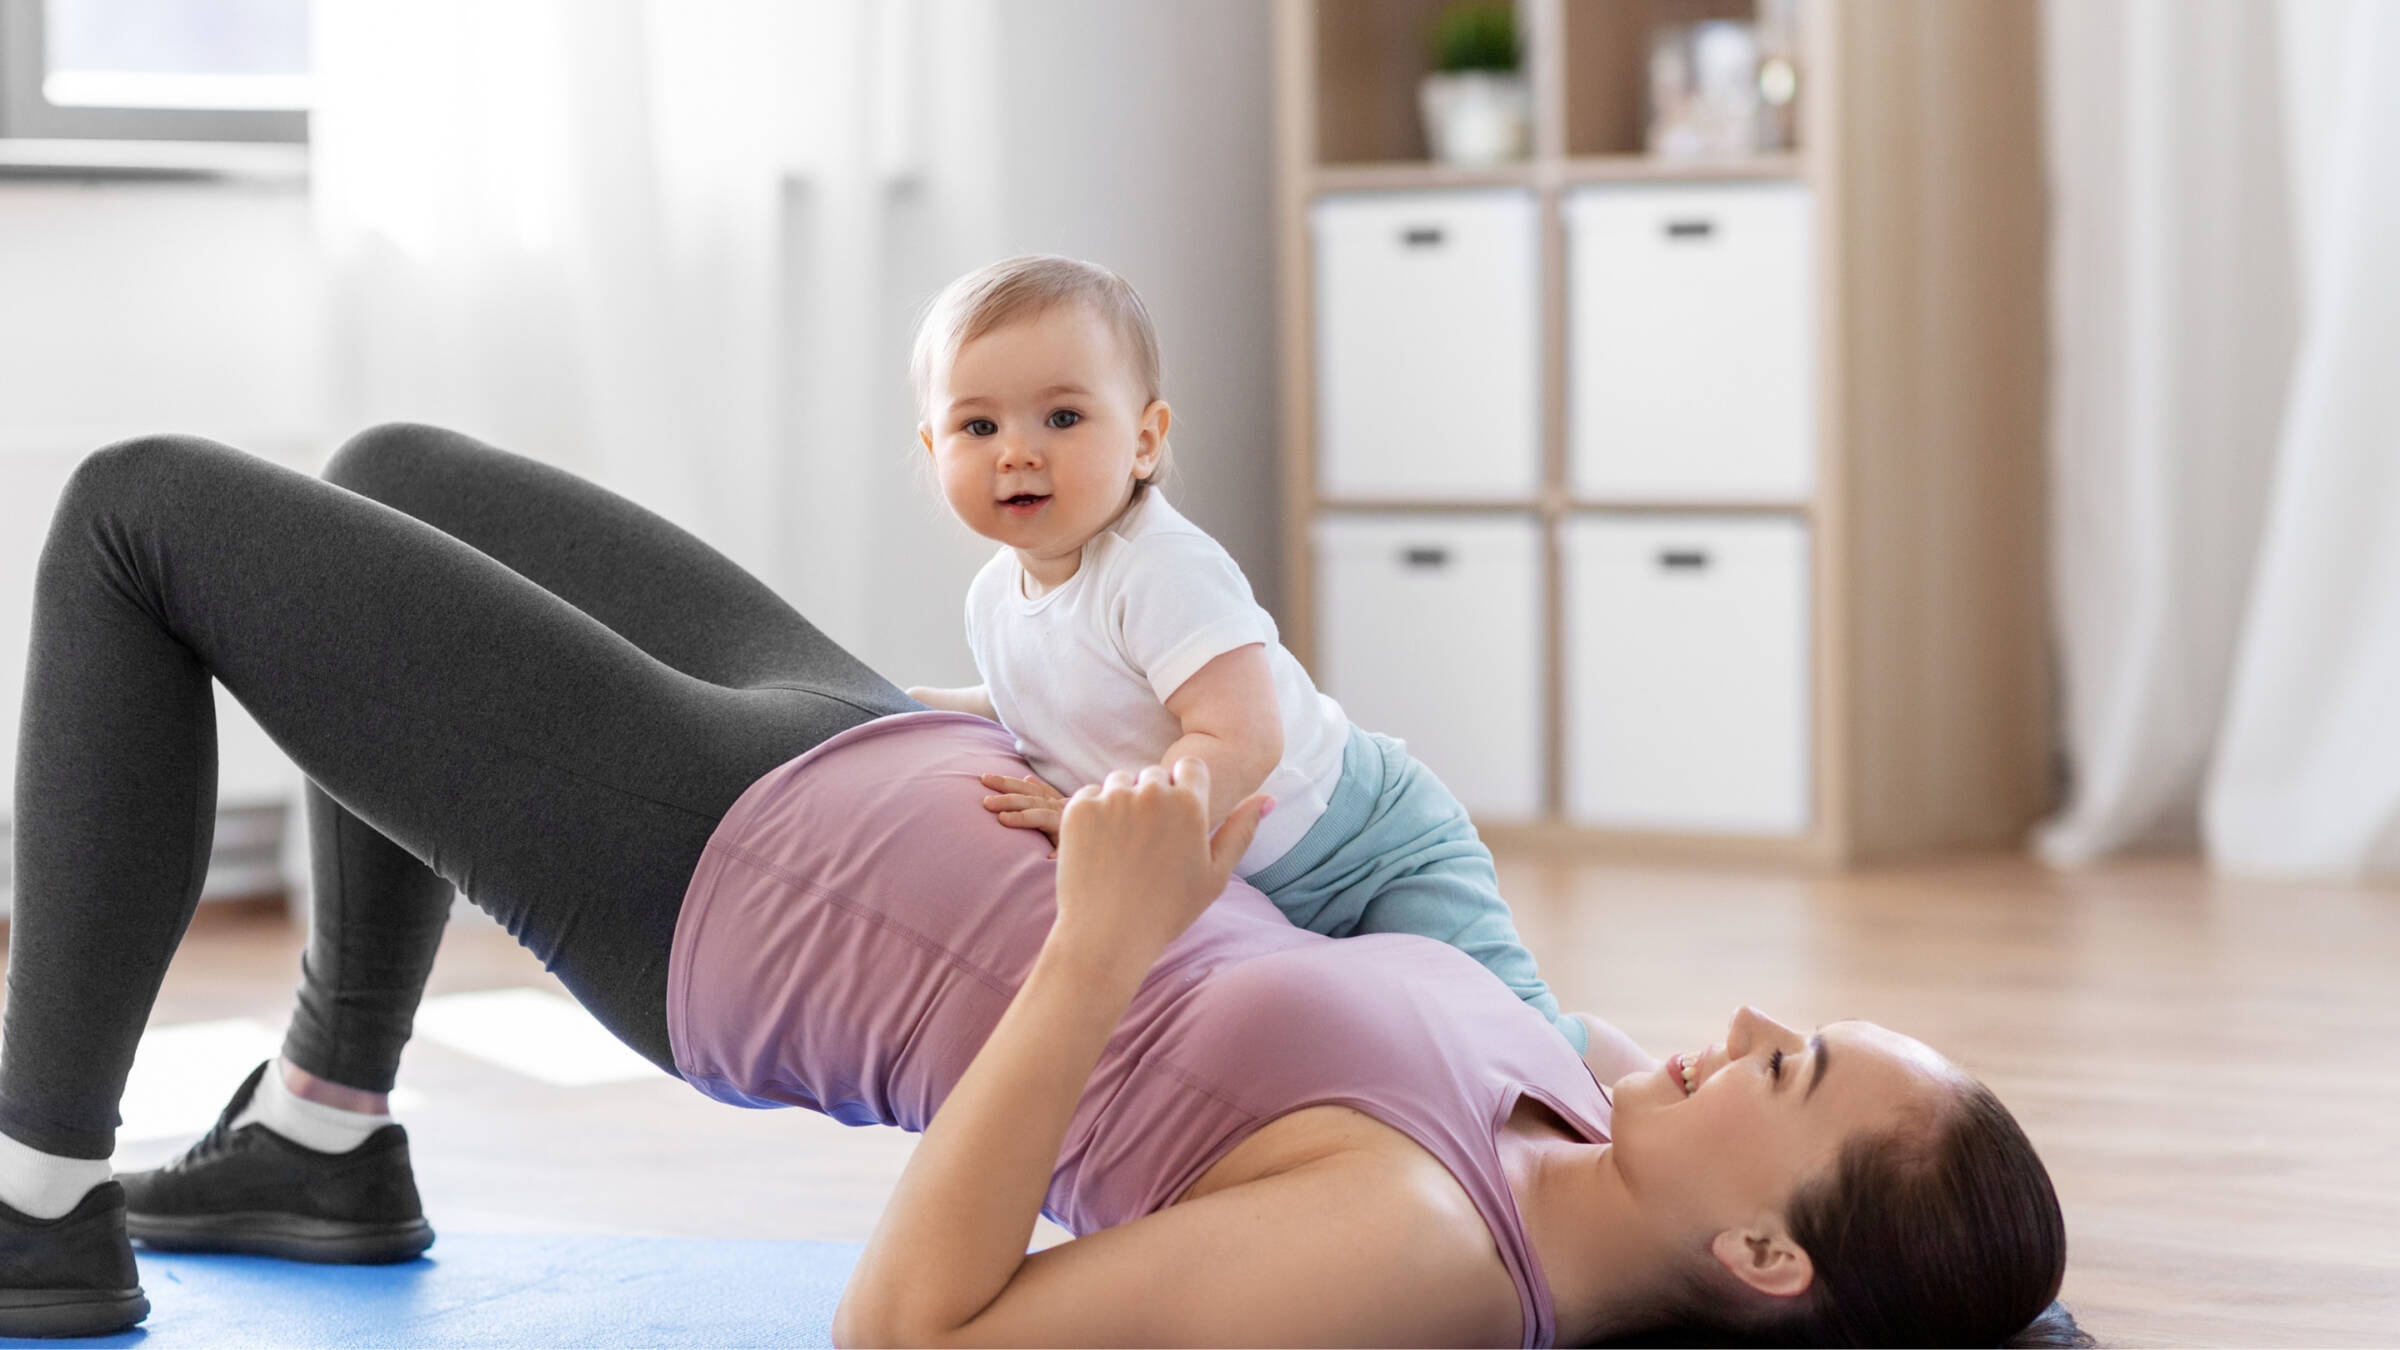 Pelvic Floor Health During Pregnancy – Can it Impact Baby’s Health?